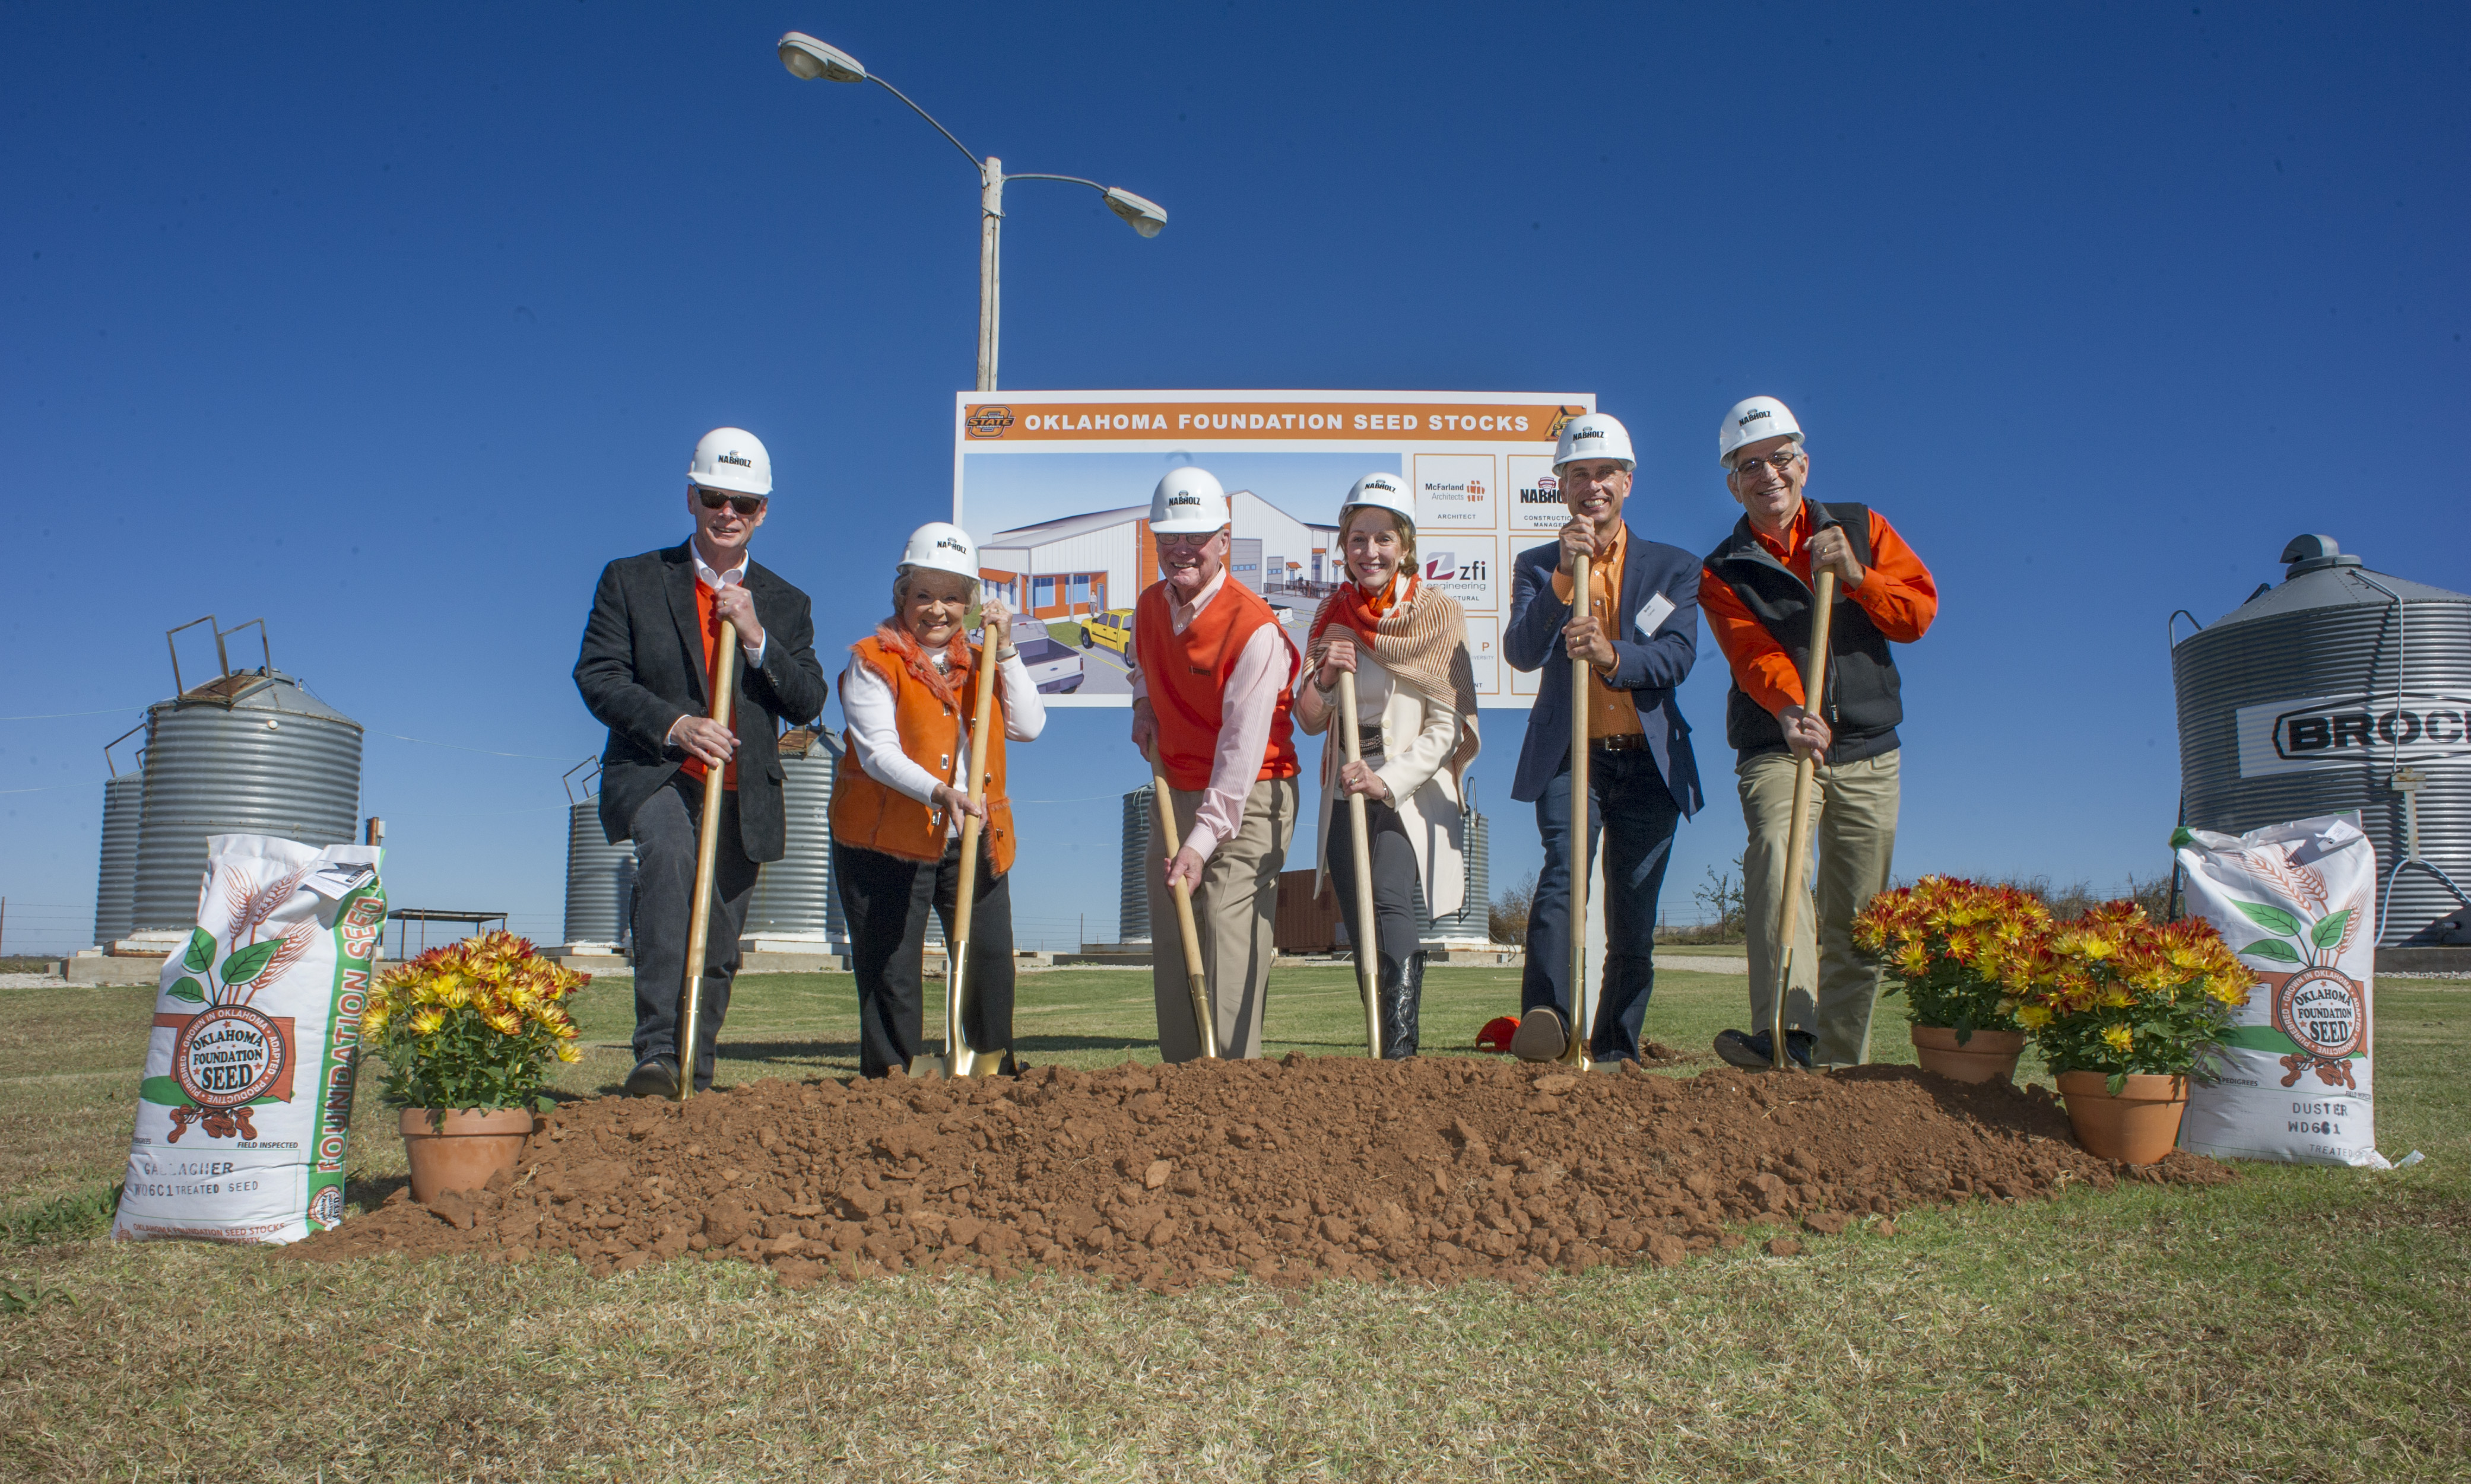 OSU Groundbreaking Continues 'Guarantee' of Providing Farmer Access to Improved Crop Varieties